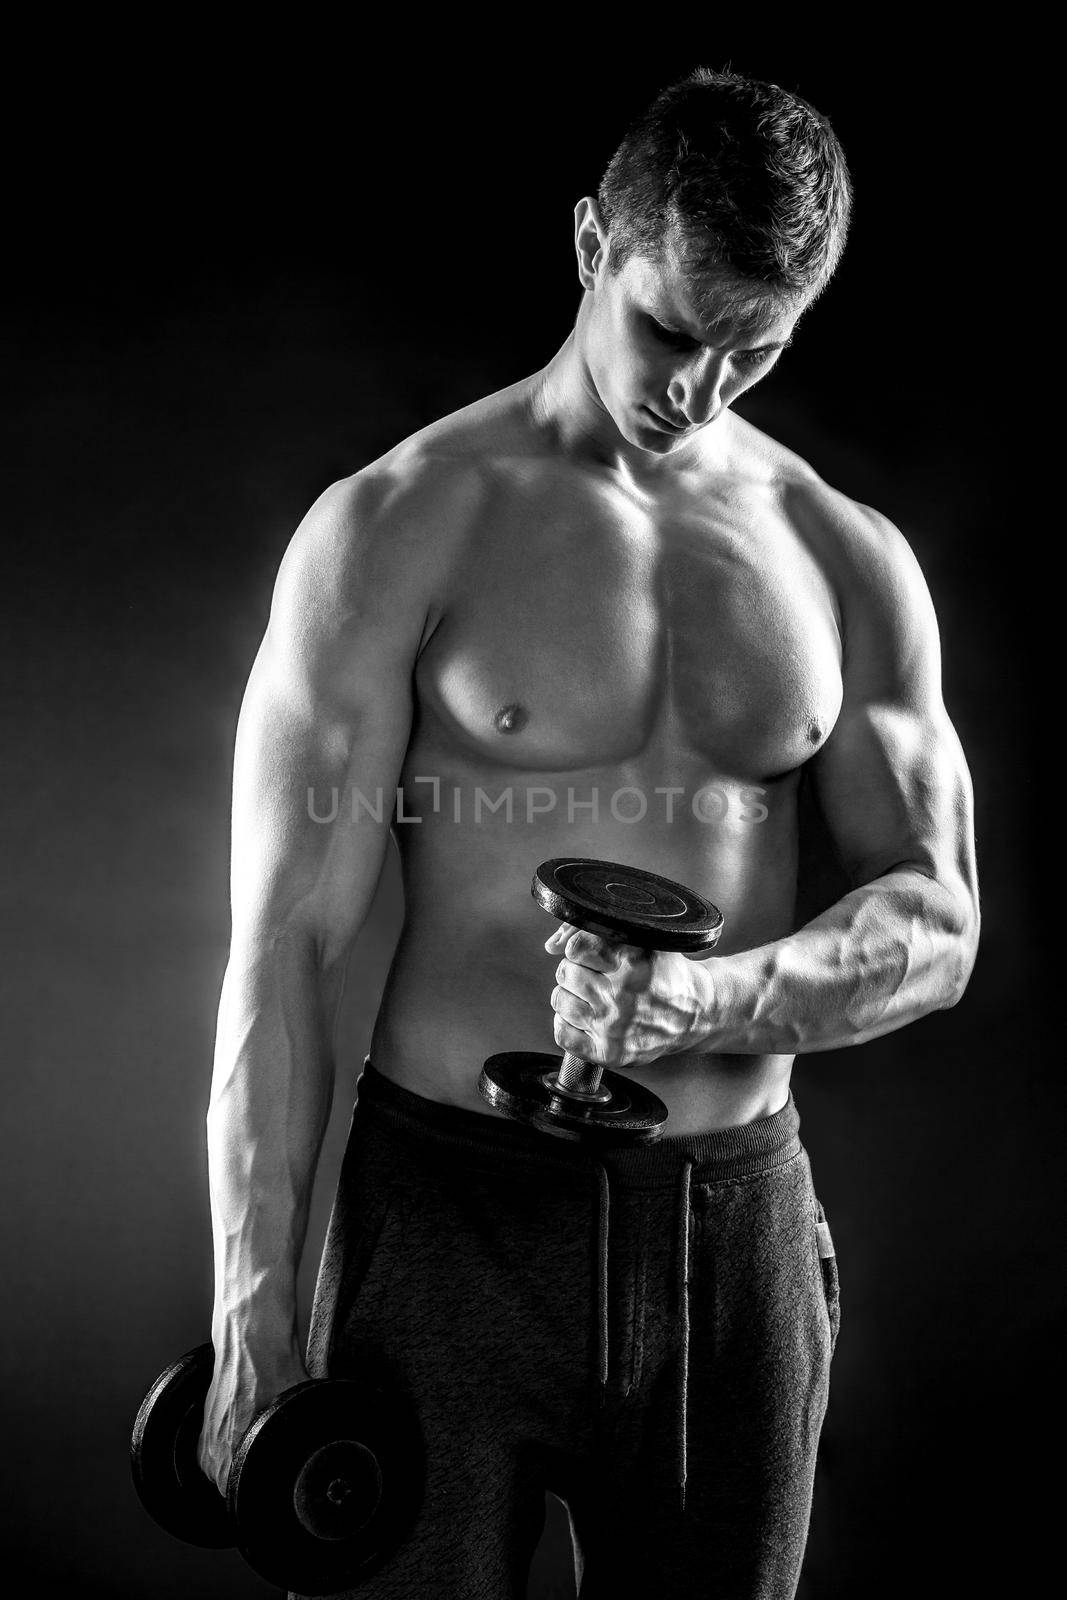 Mighty fitness man showing his gread body with dumbbells in hand on black background.. Black and white